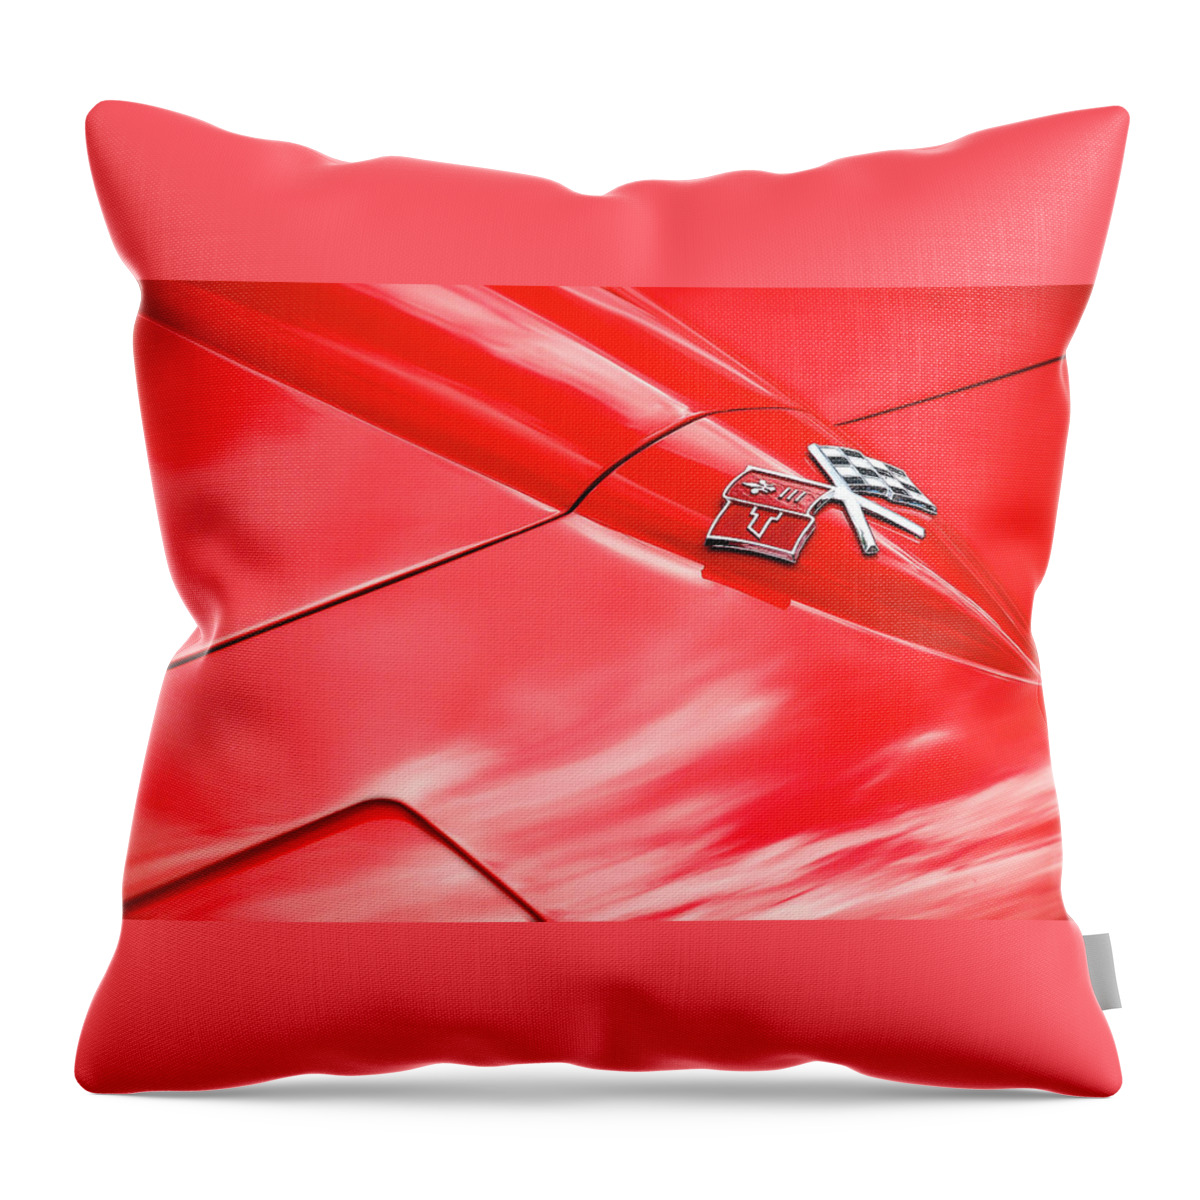 Hood Throw Pillow featuring the photograph Red Corvette Hood by Brian Kinney